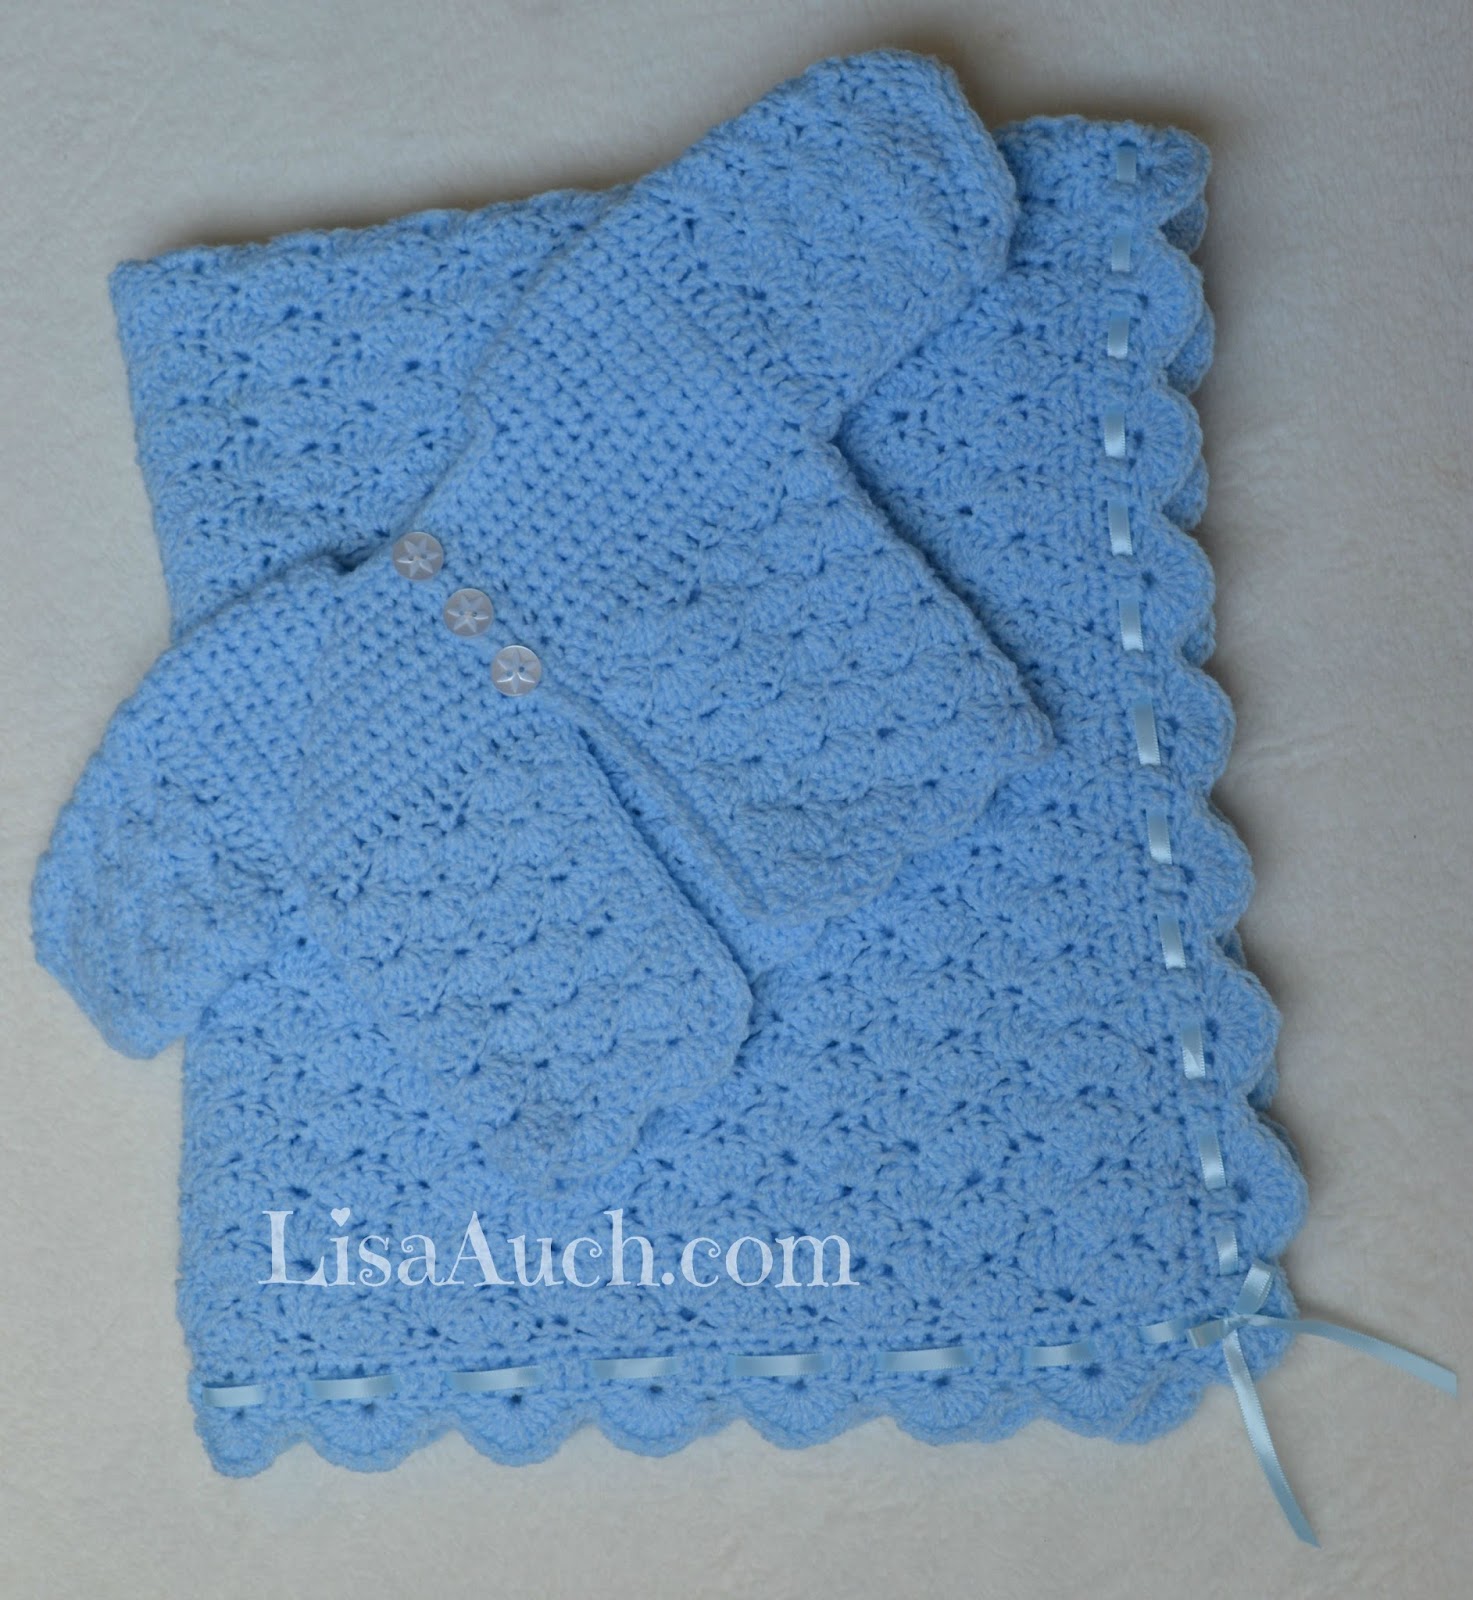 Free Crochet Patterns For Babies Cardigan And Blanket Set The Perfect Crochet Set For A Boy Or Girl